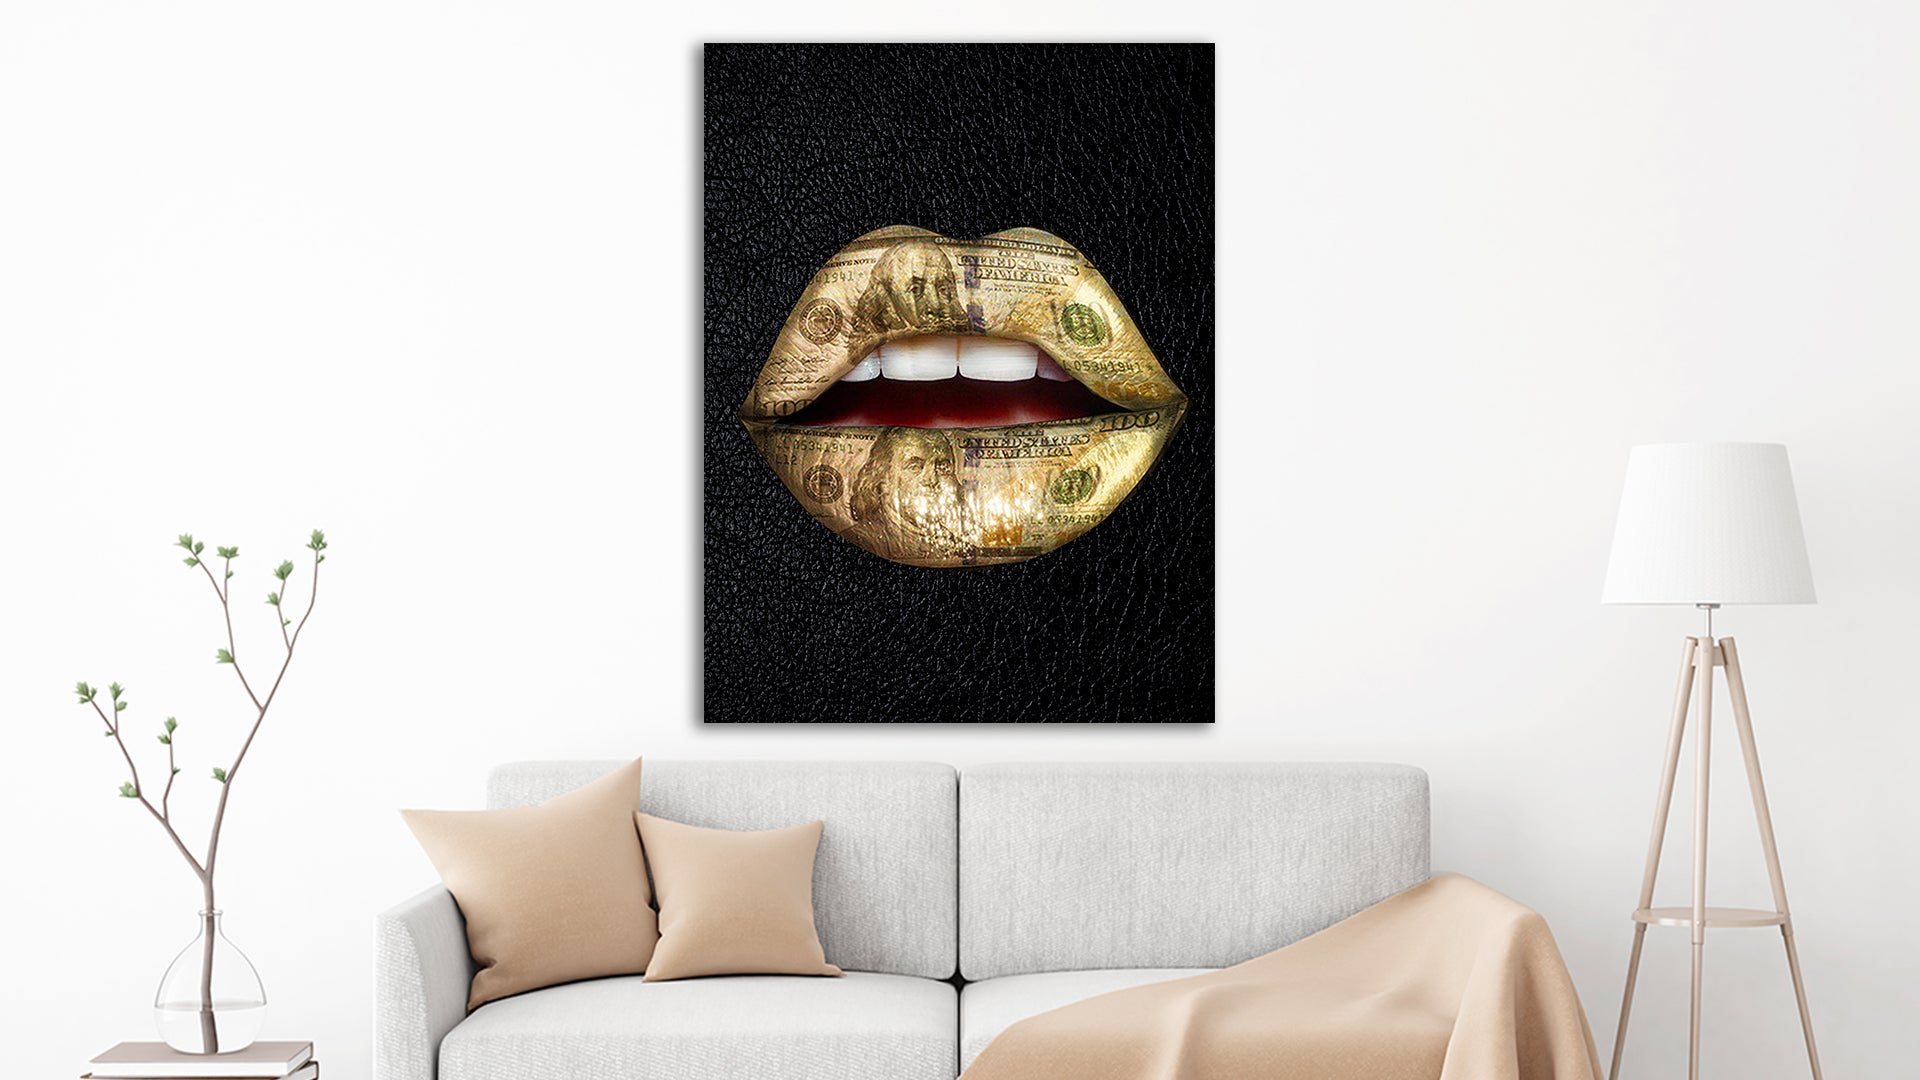  CanvasVilla GOLD LIPS CANVAS WALL ART - ABOVE COUCH WALL DECOR  Motivational Inspirational Quotes Canvas Print Wall Art Painting Decor for  Office, Home- 12X16 Black Frame small - Ready To Hang